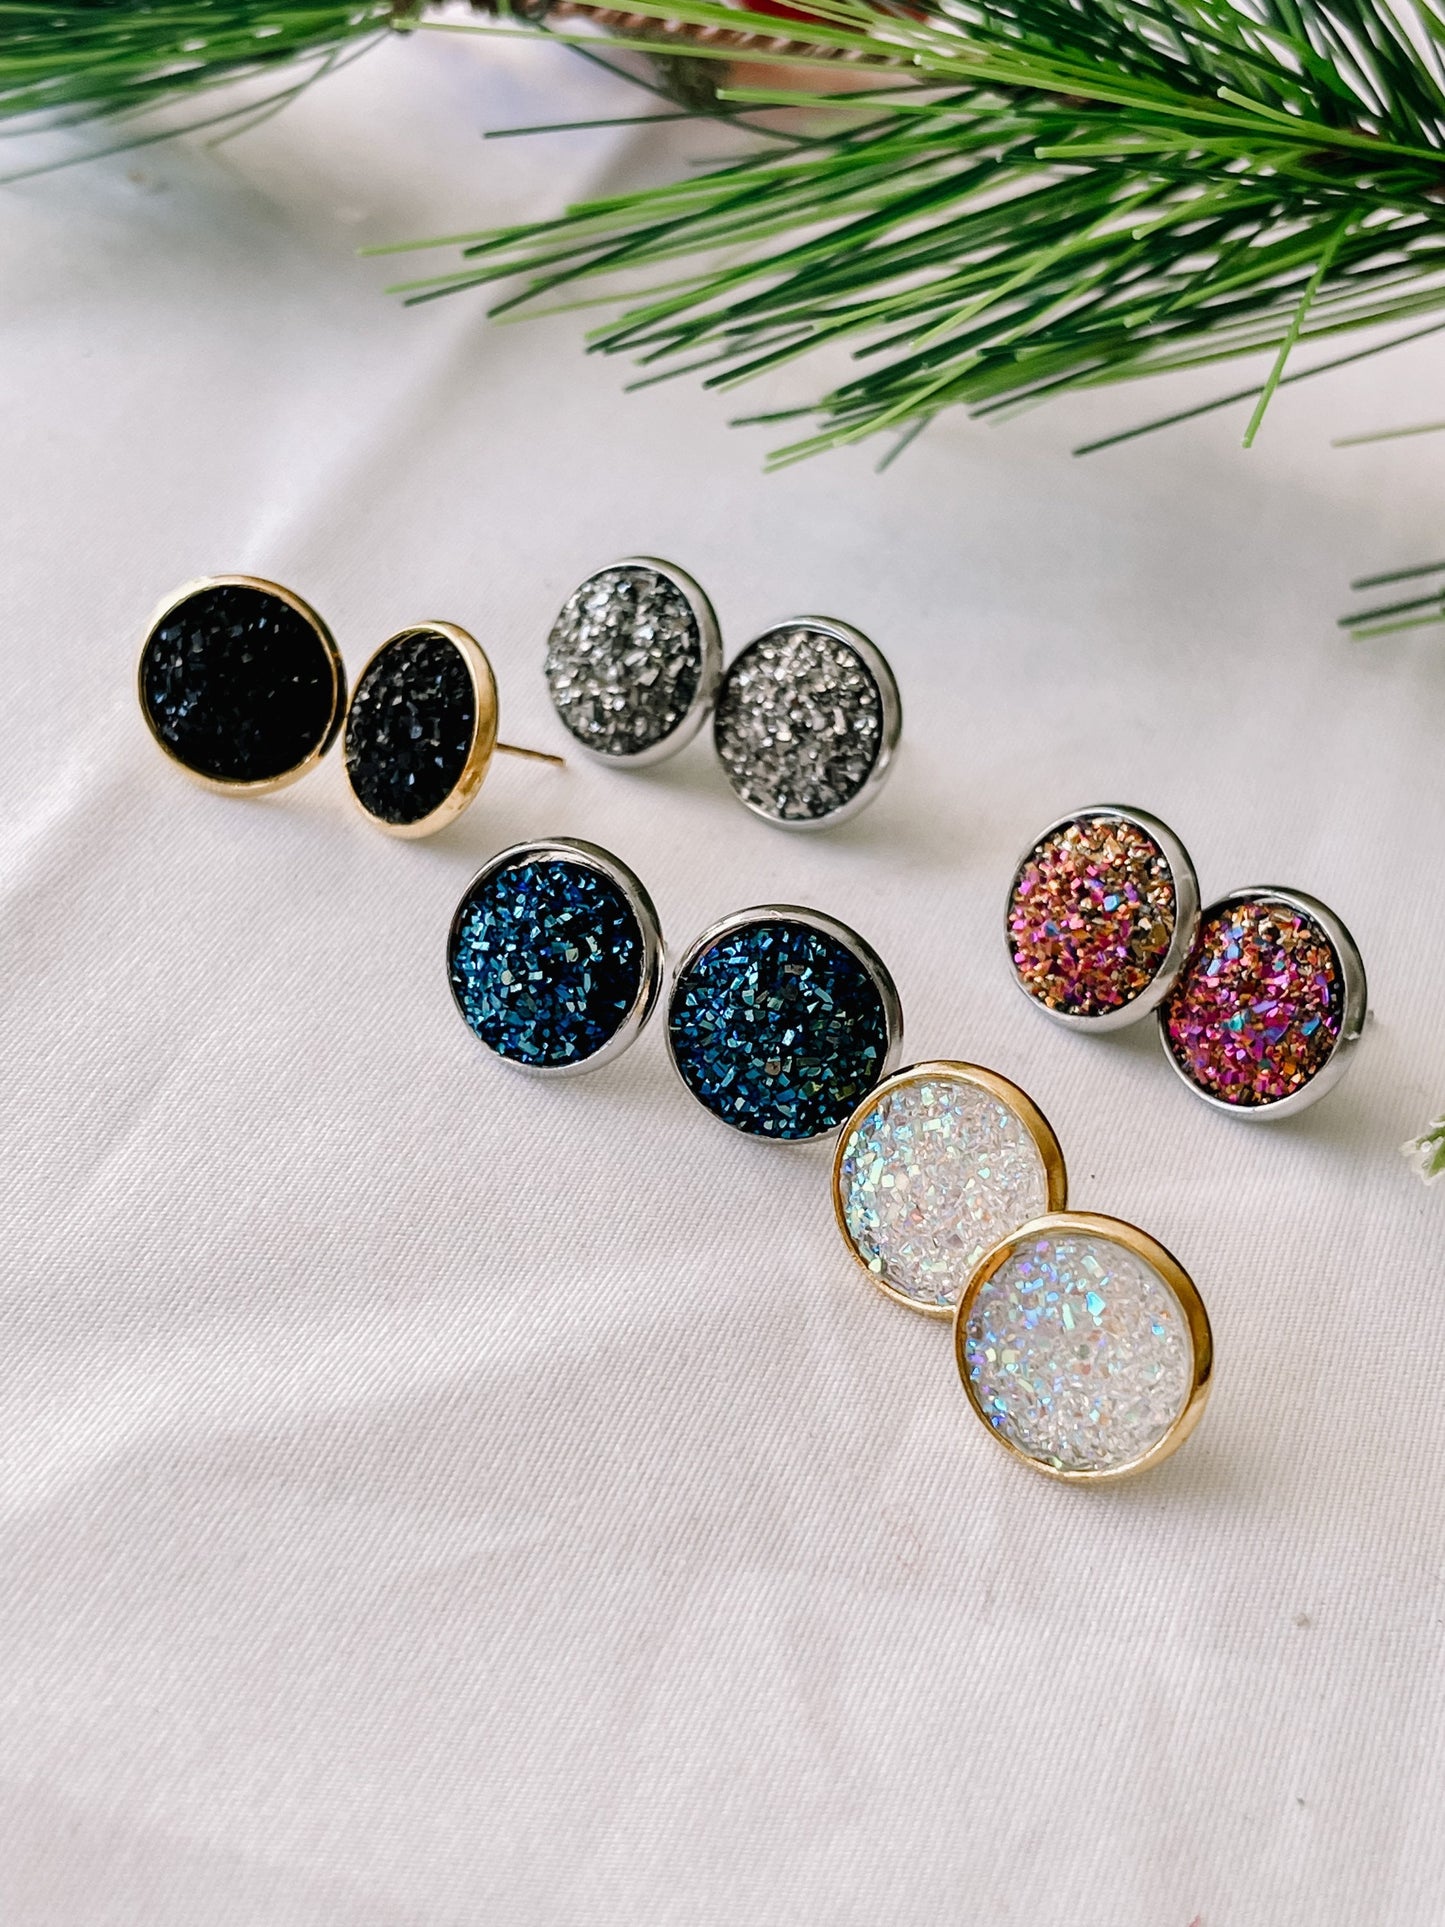 Sparkly stud earrings, sparkly studs, druzy studs